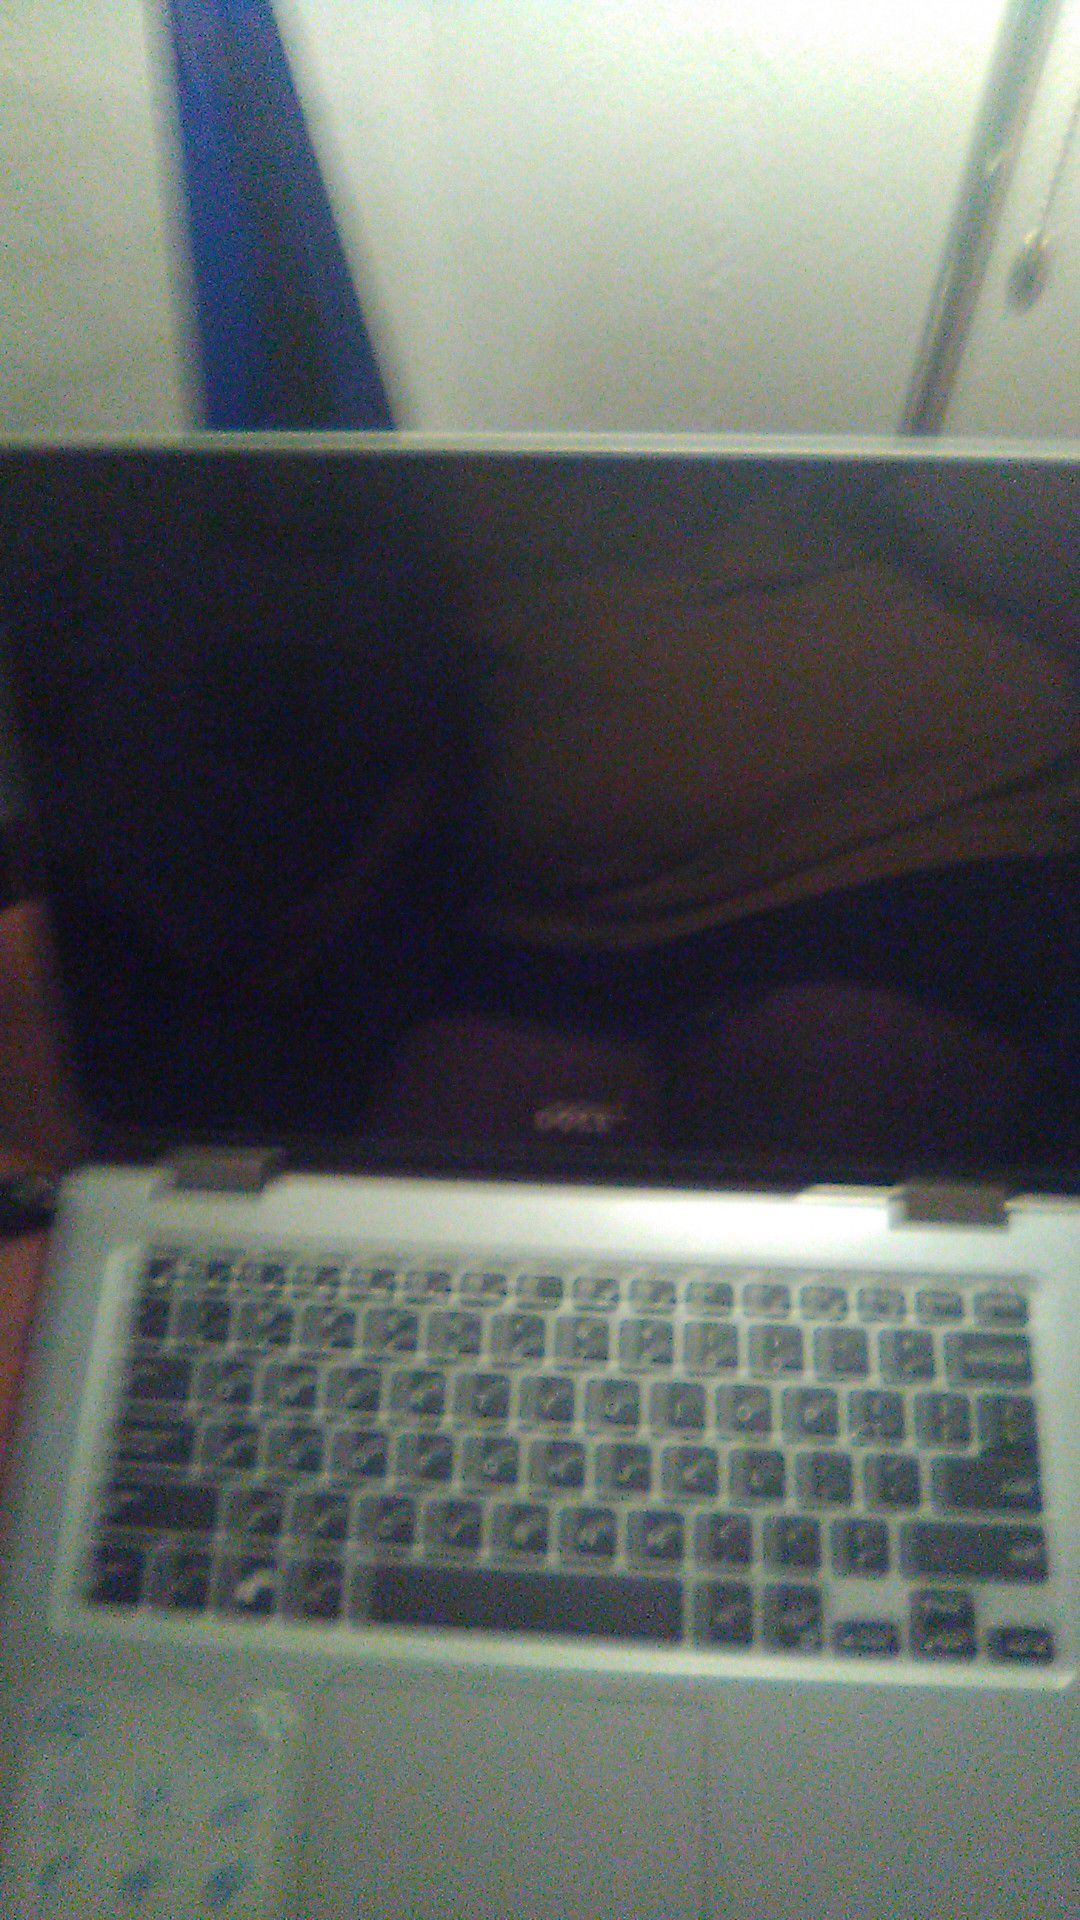 Dell Inspiron touch screen laptop